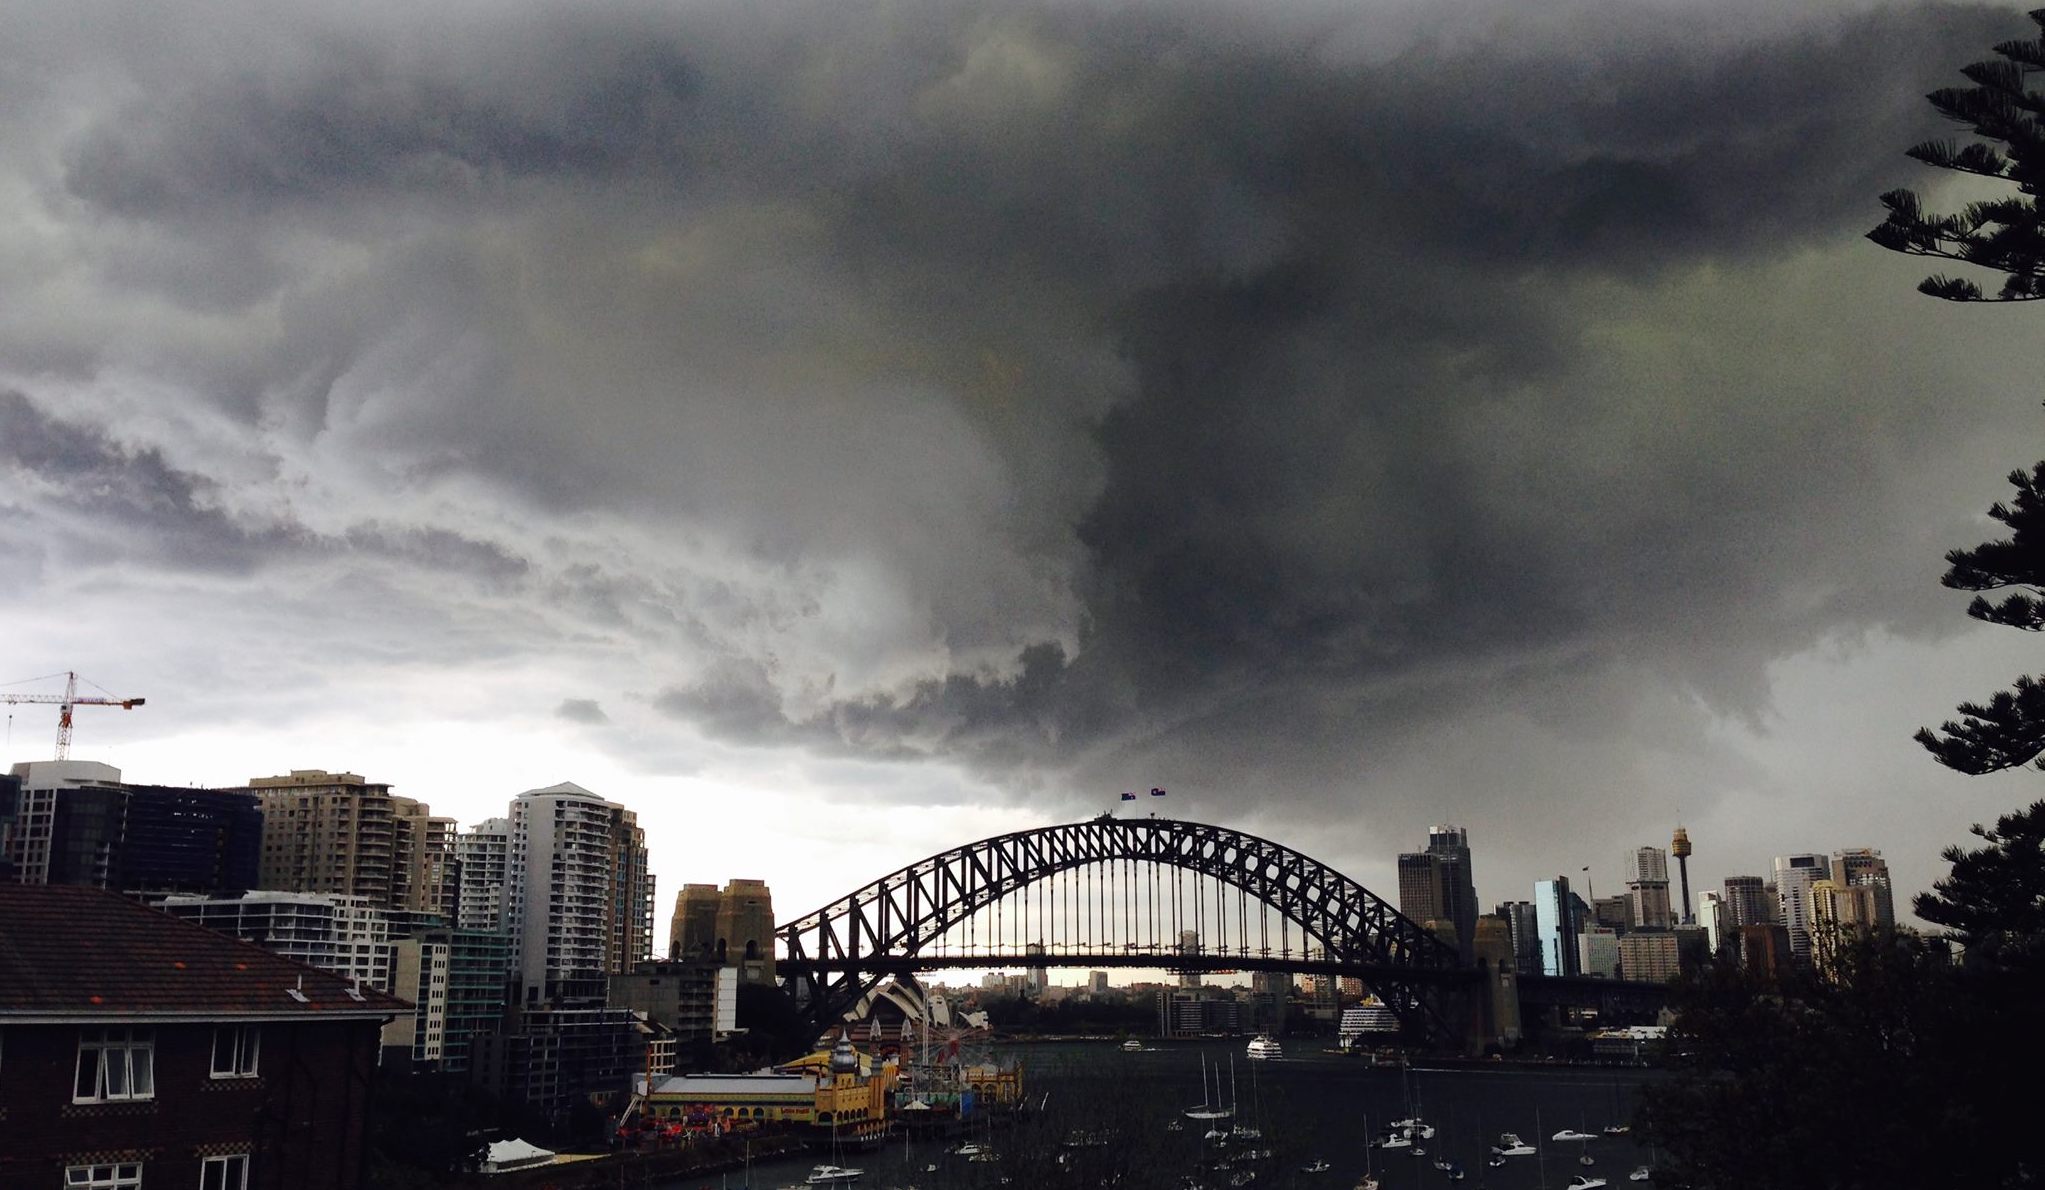 Sydney on track to exceed last year's rainfall in half the time